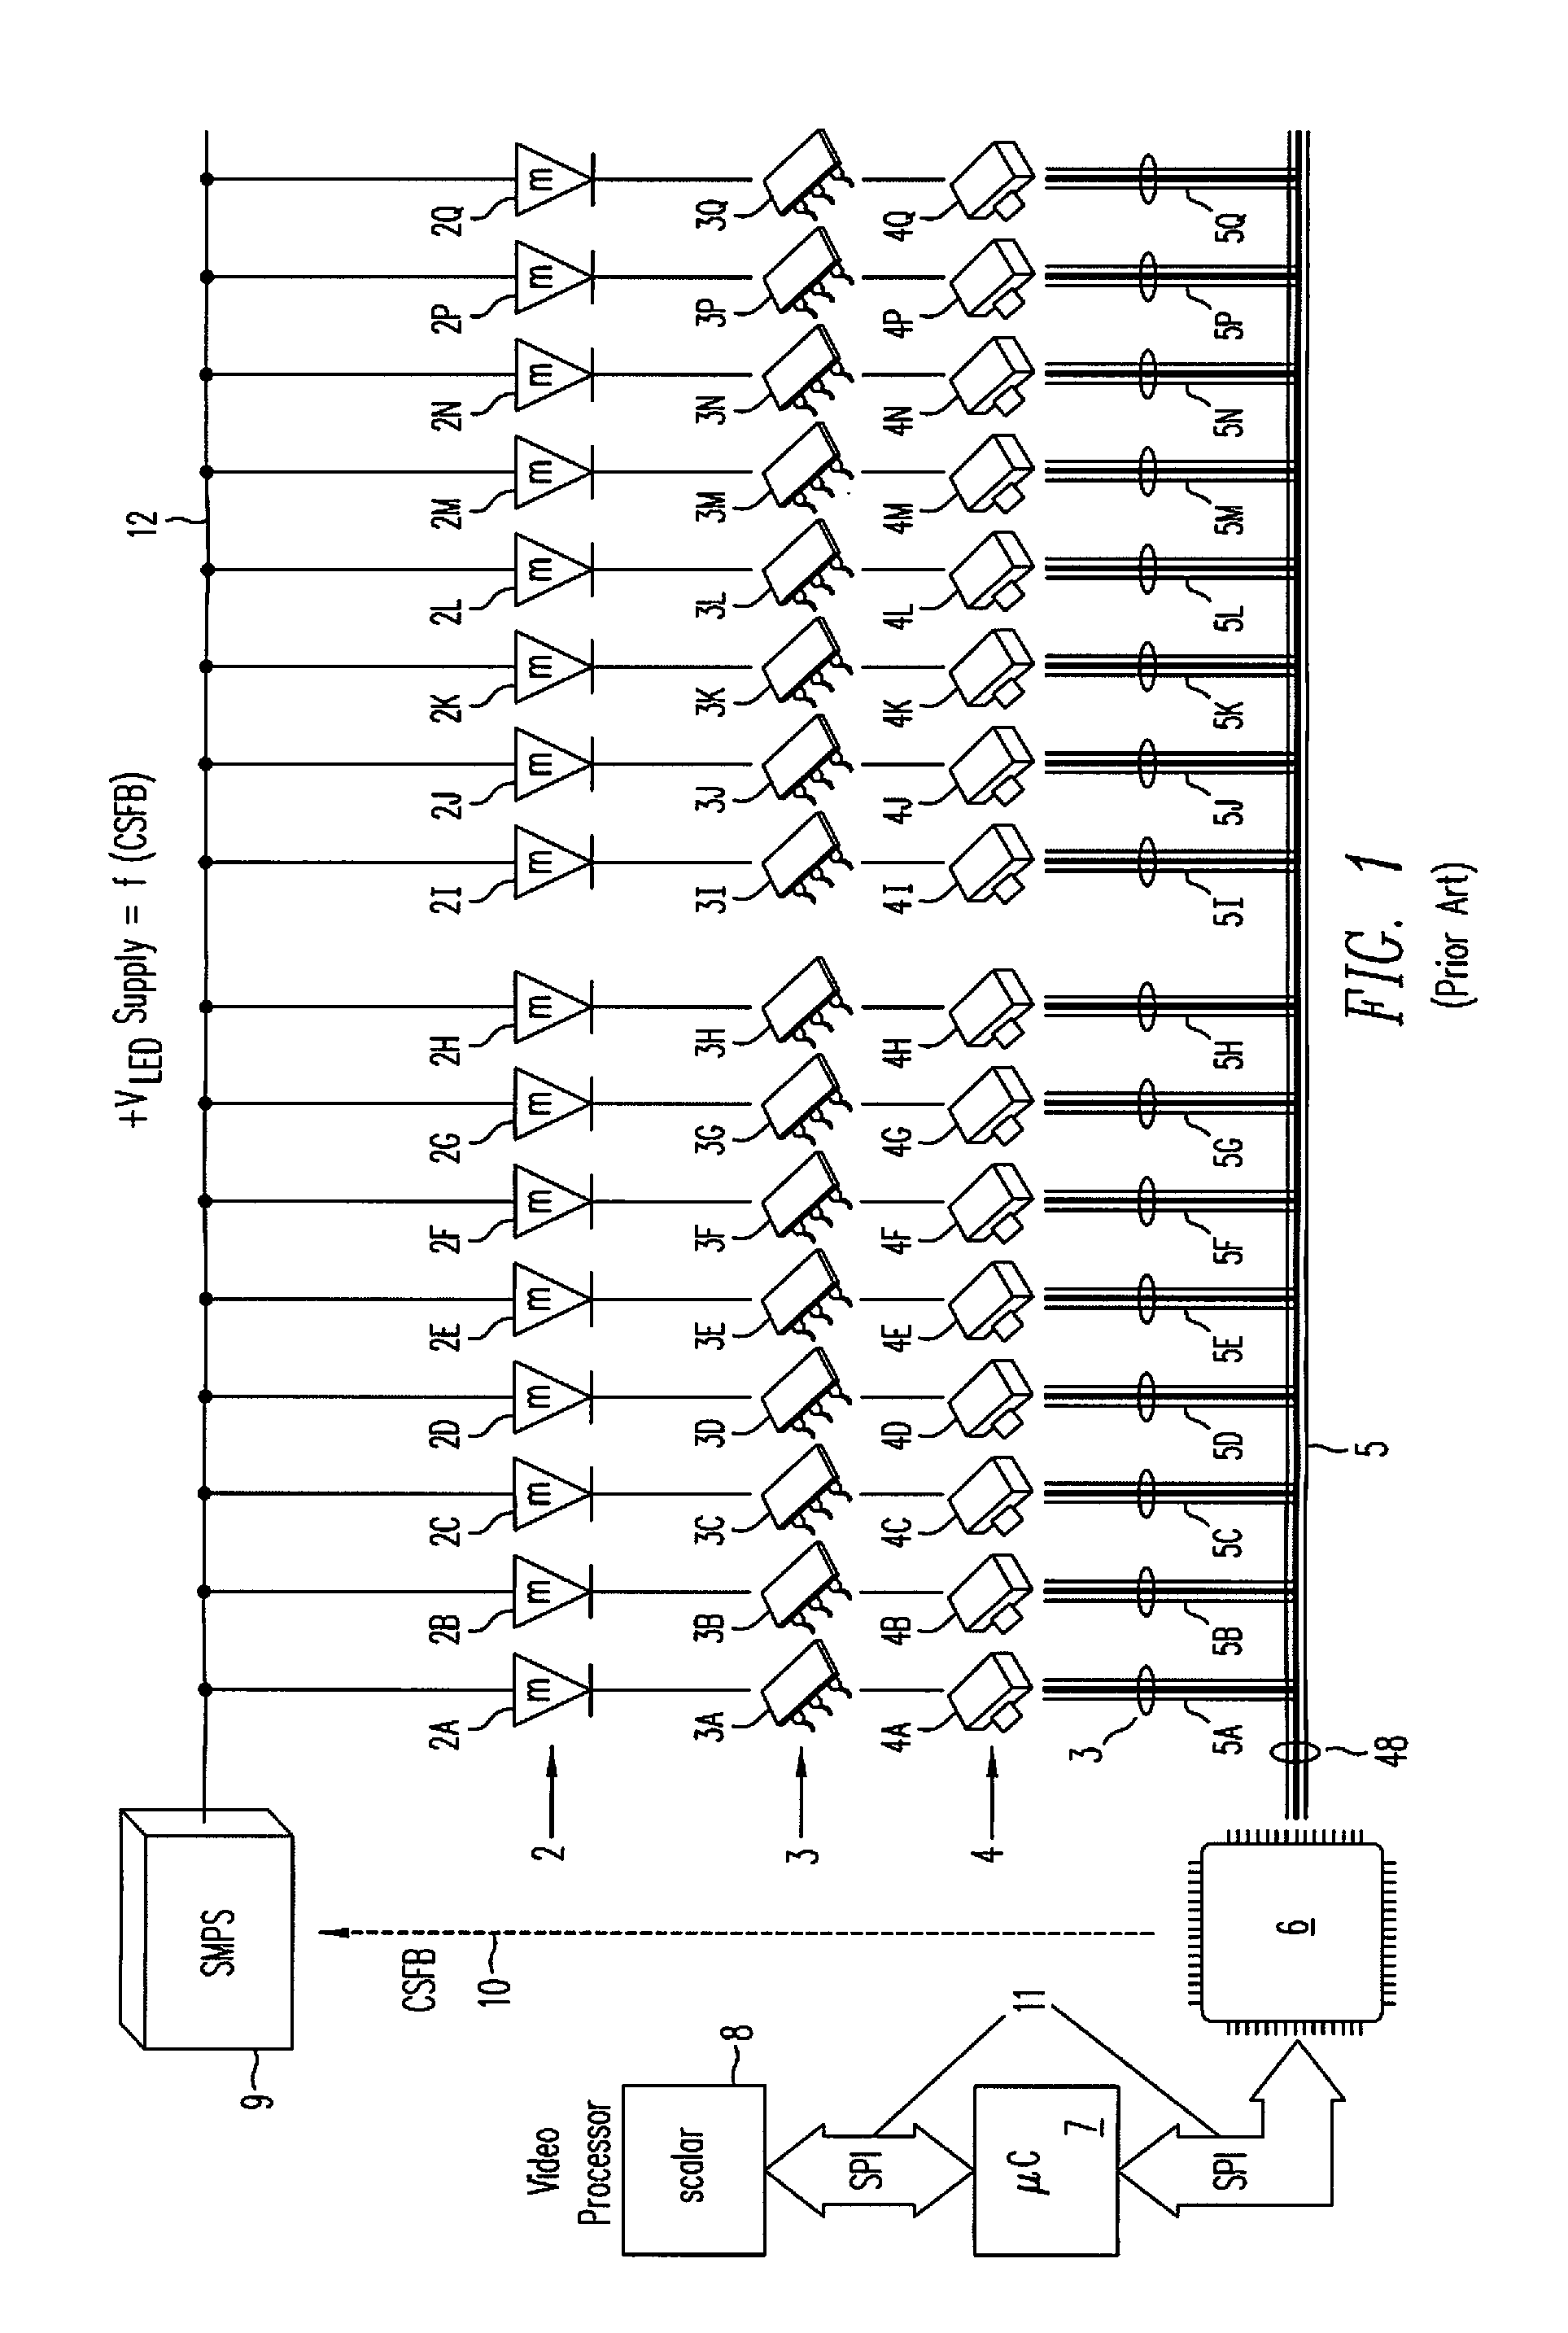 Serial Lighting Interface With Embedded Feedback